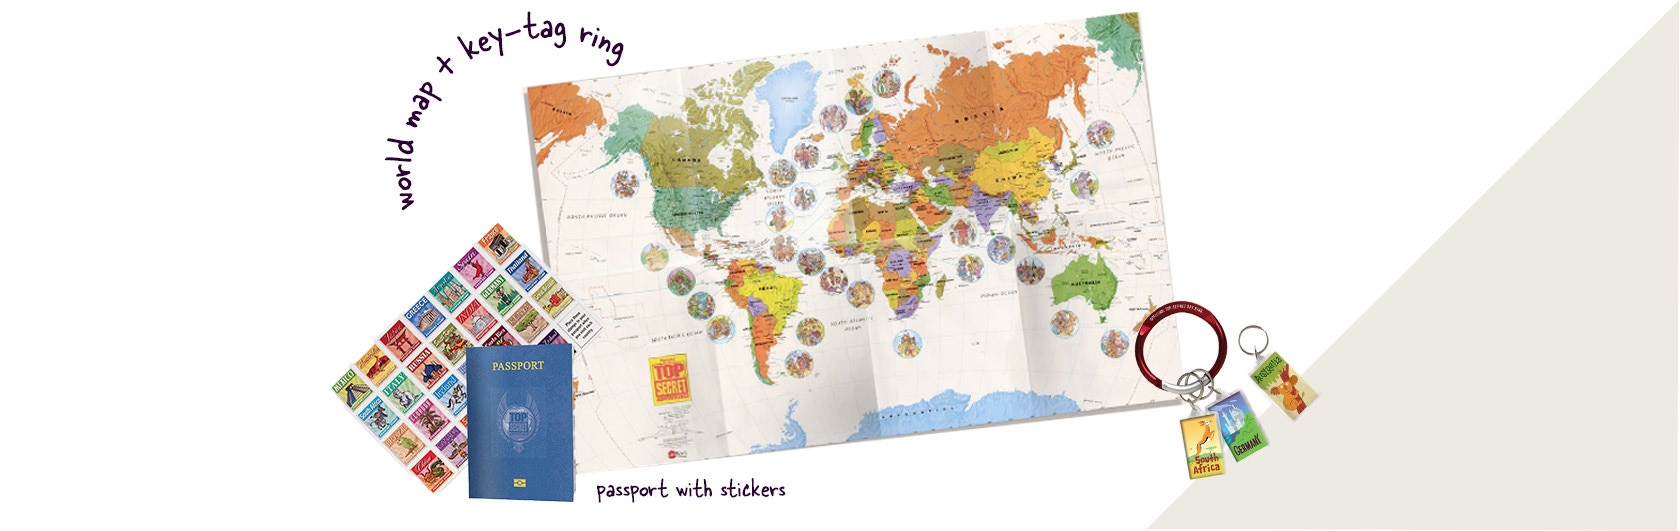 Get a free world map, passport with stickers and key-tag ring with your subscription! 